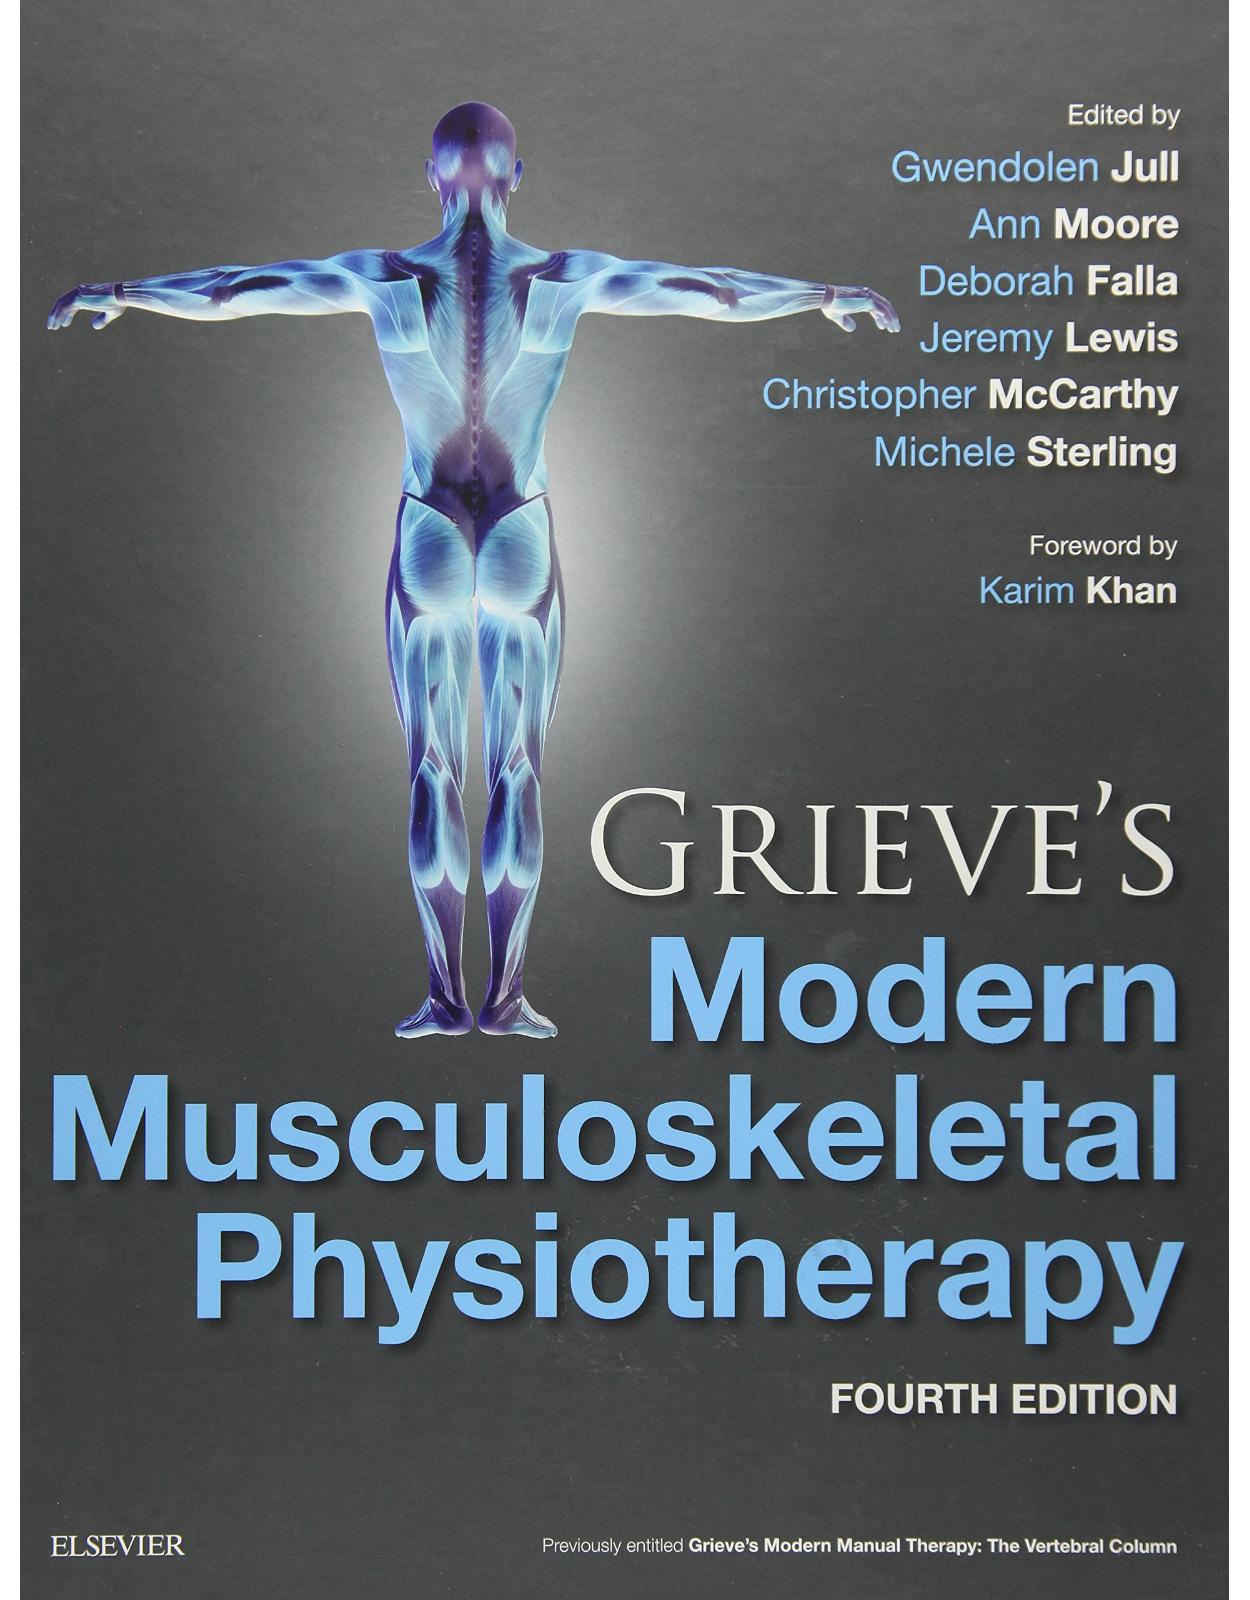 Grieve's Modern Musculoskeletal Physiotherapy, 4e